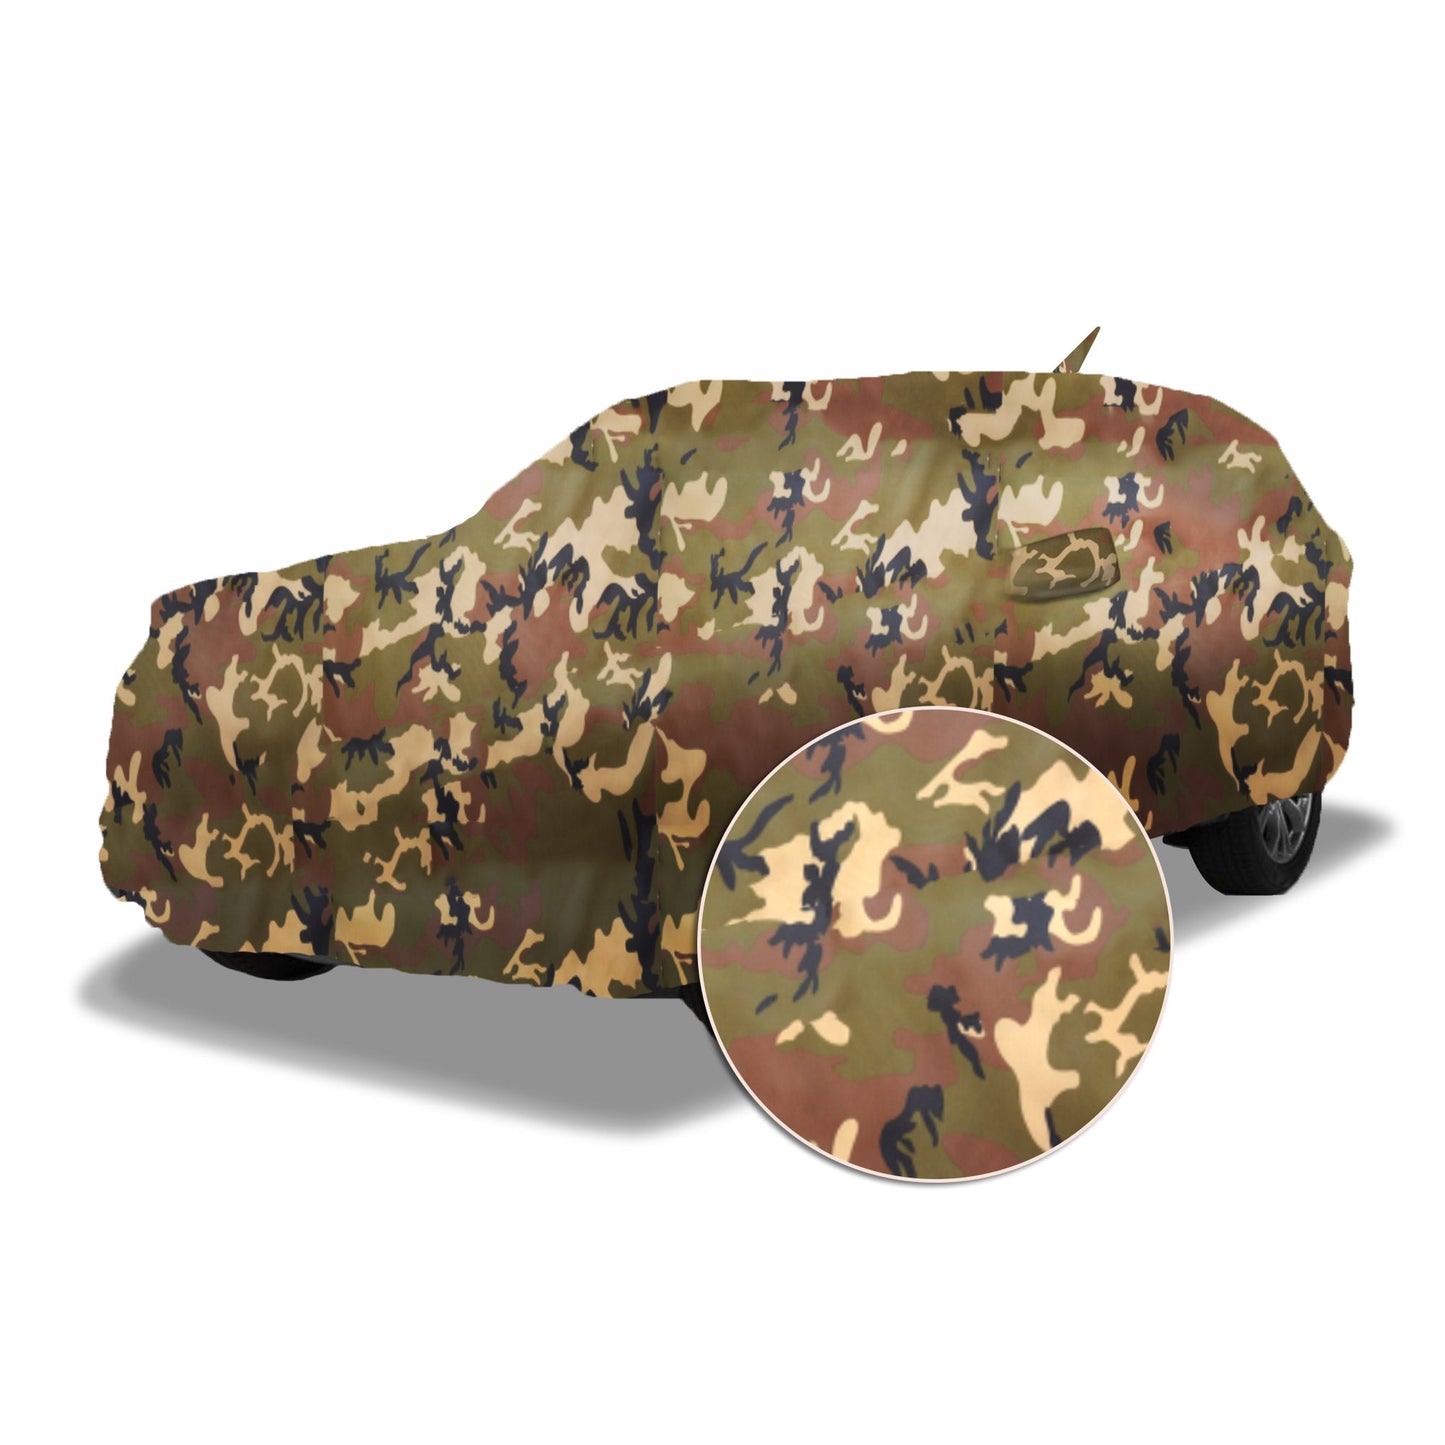 Ascot Toyota Fortuner Car Body Cover Extra Strong & Dust Proof Jungle Military Car Cover with UV Proof & Water-Resistant Coating